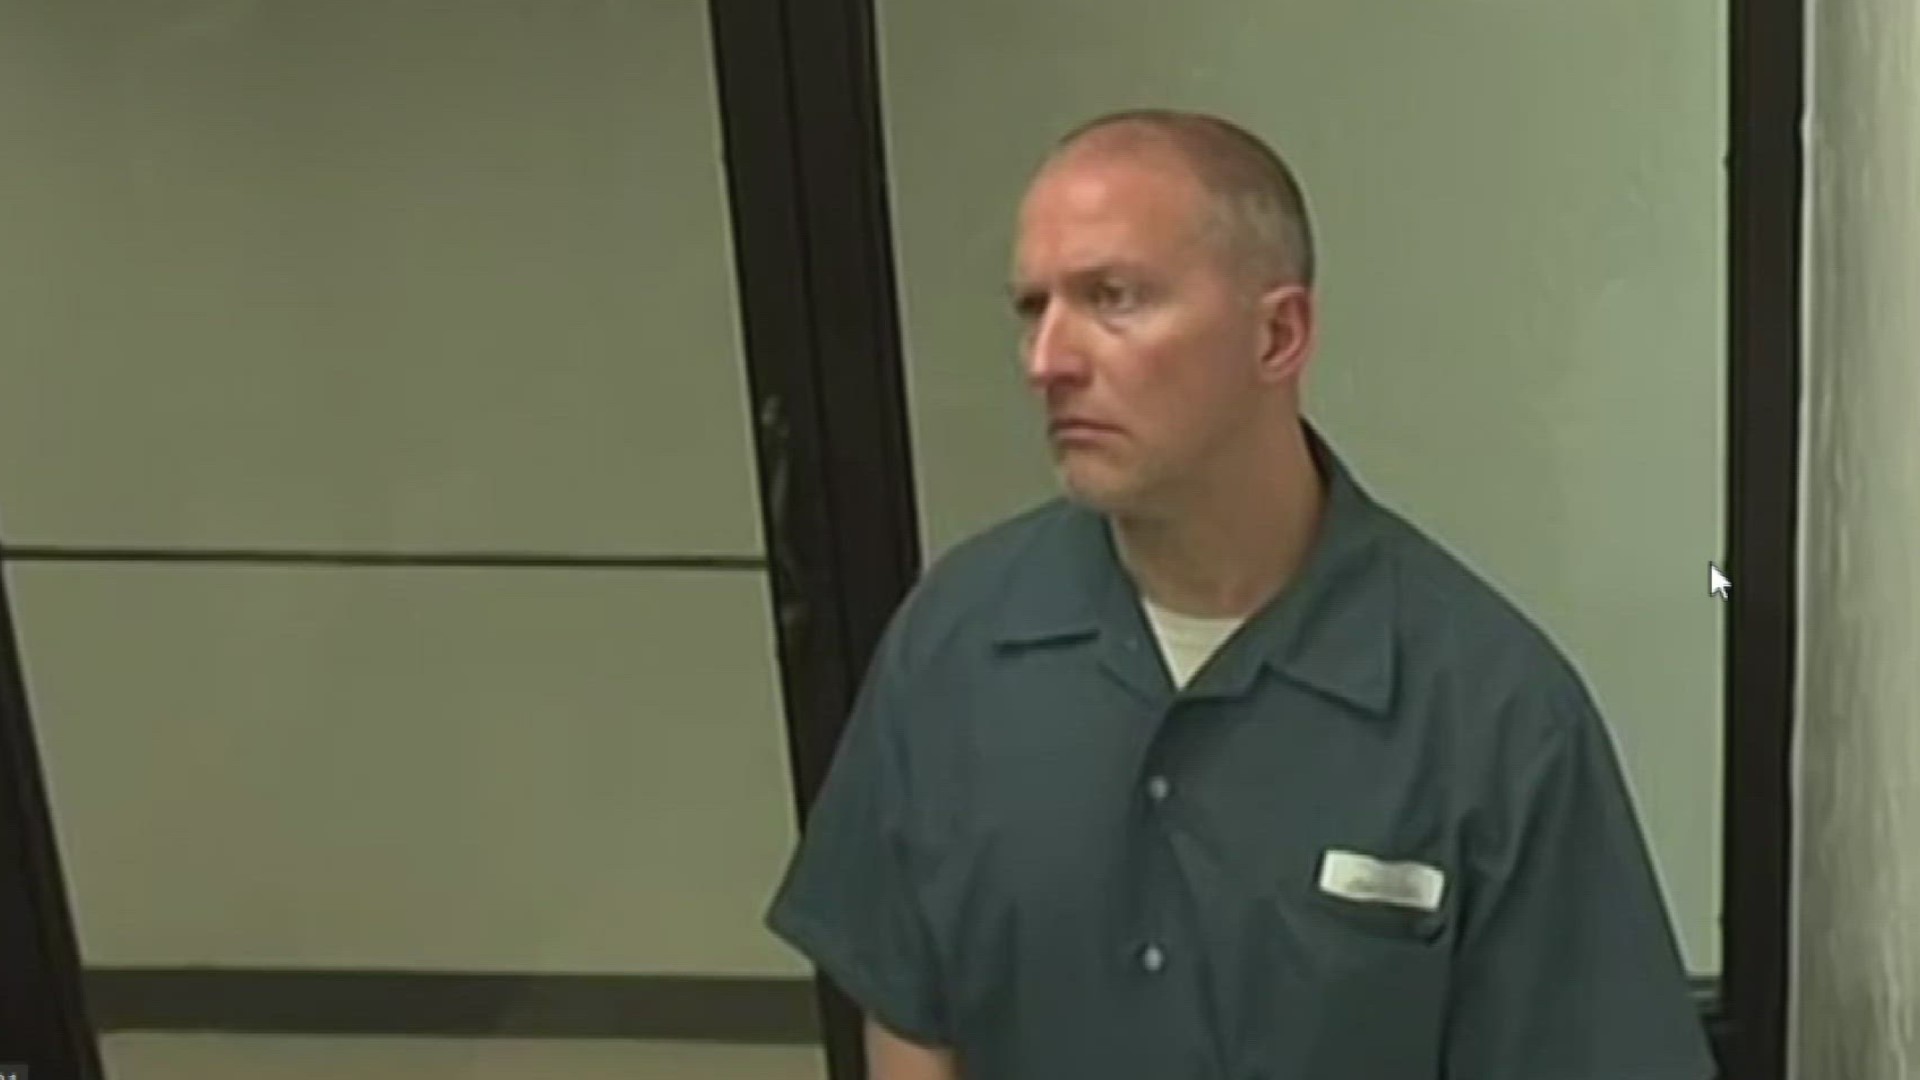 Ex-Minneapolis police officer Derek Chauvin, who's currently serving 21 years for the murder of George Floyd, was sentenced to 13 months in prison for tax evasion.